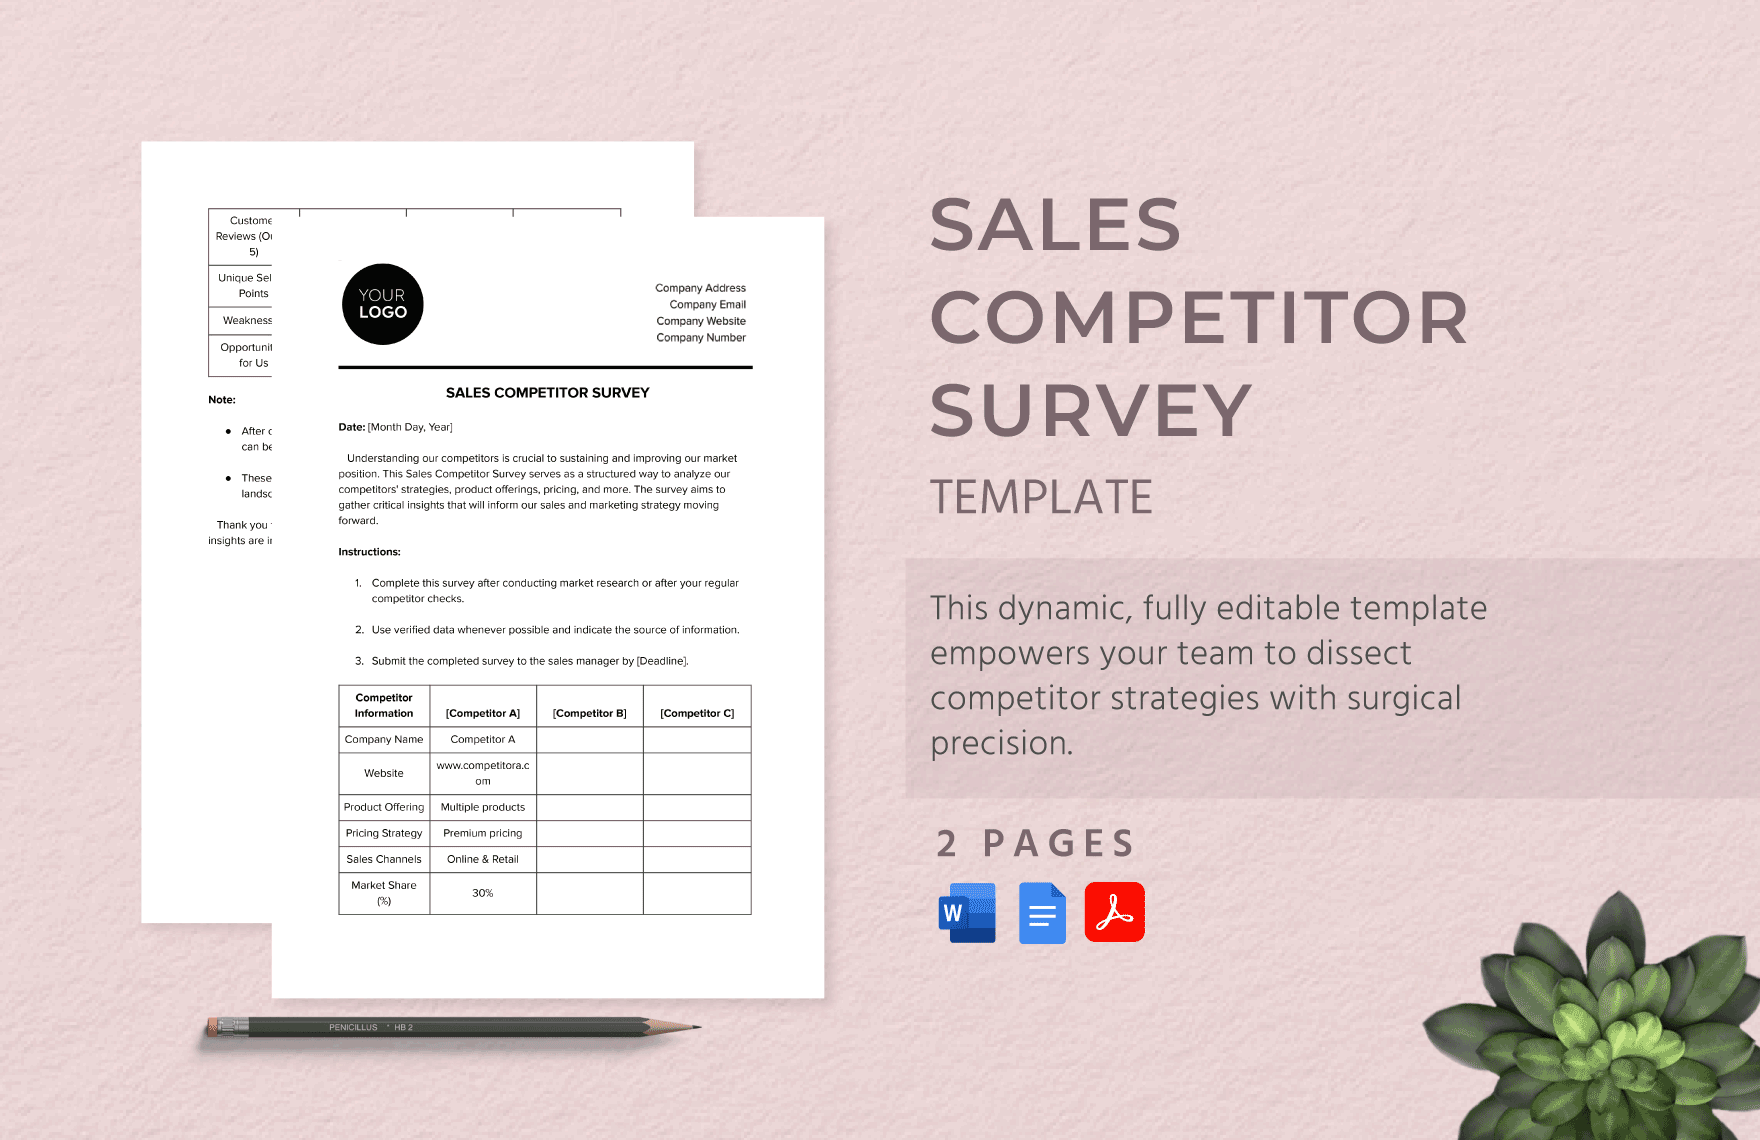 Sales Competitor Survey Template in Word, Google Docs, PDF